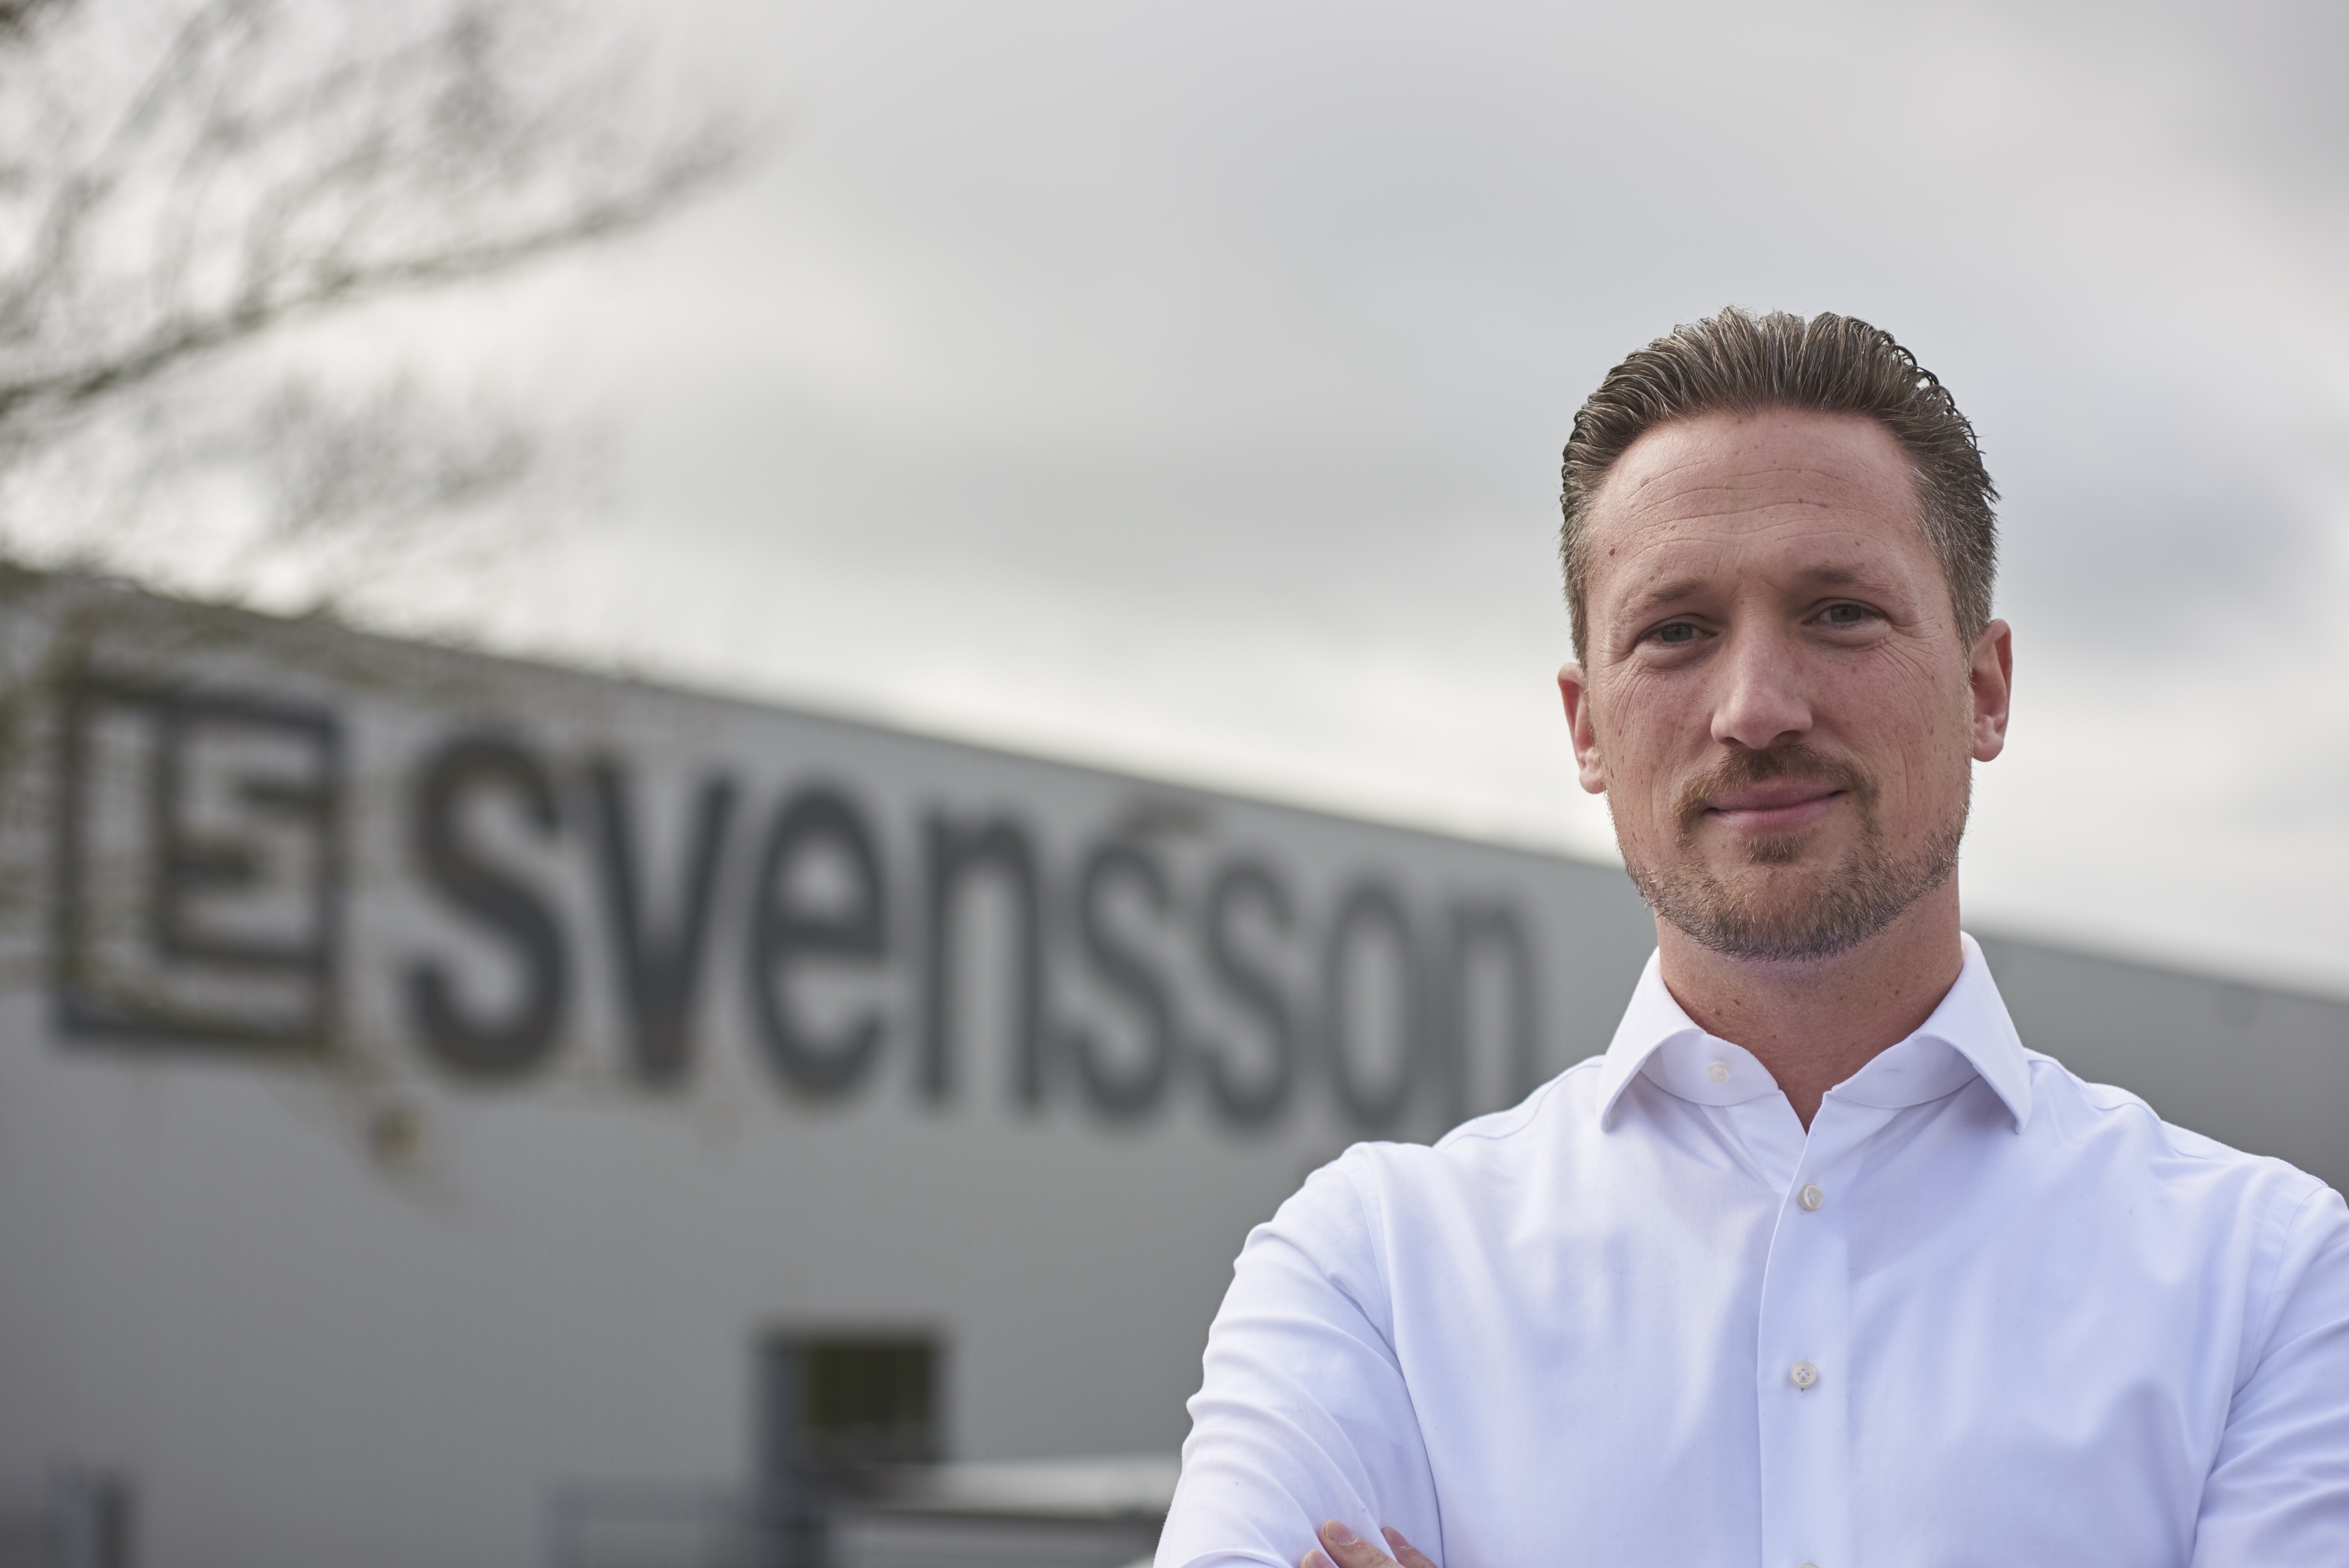 Wouter de Jong in front of Svensson office in the Netherlands